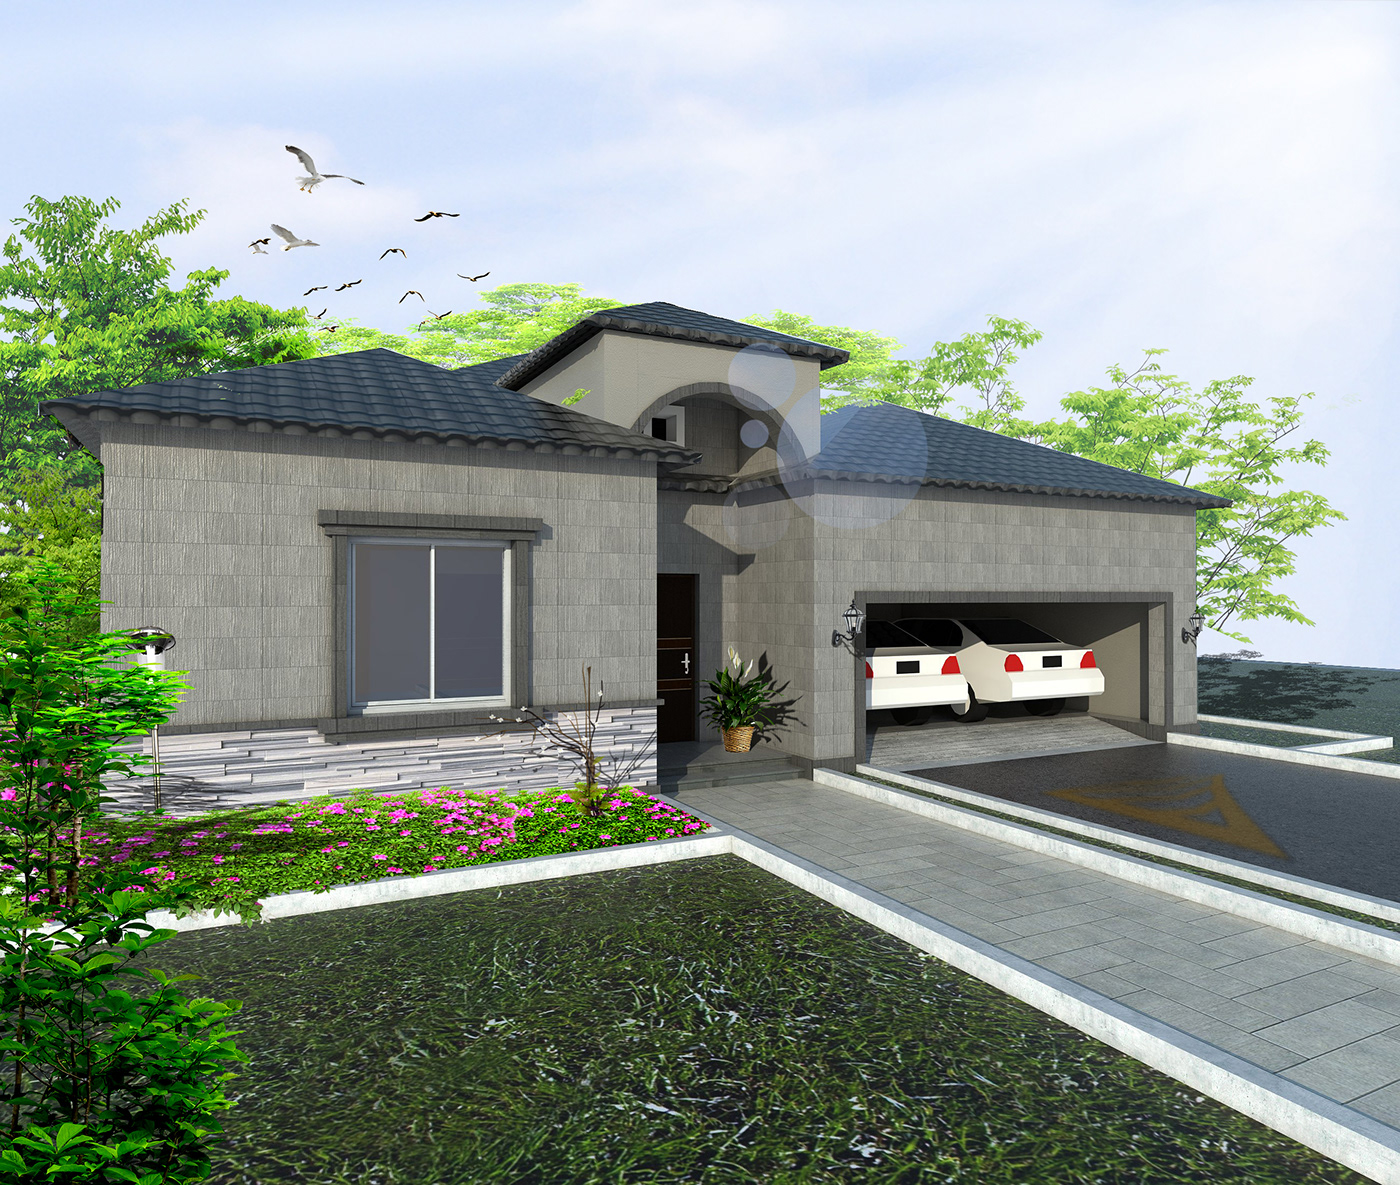 3d model(exterior view) of a resedential house.Gabriella project from fiverr.